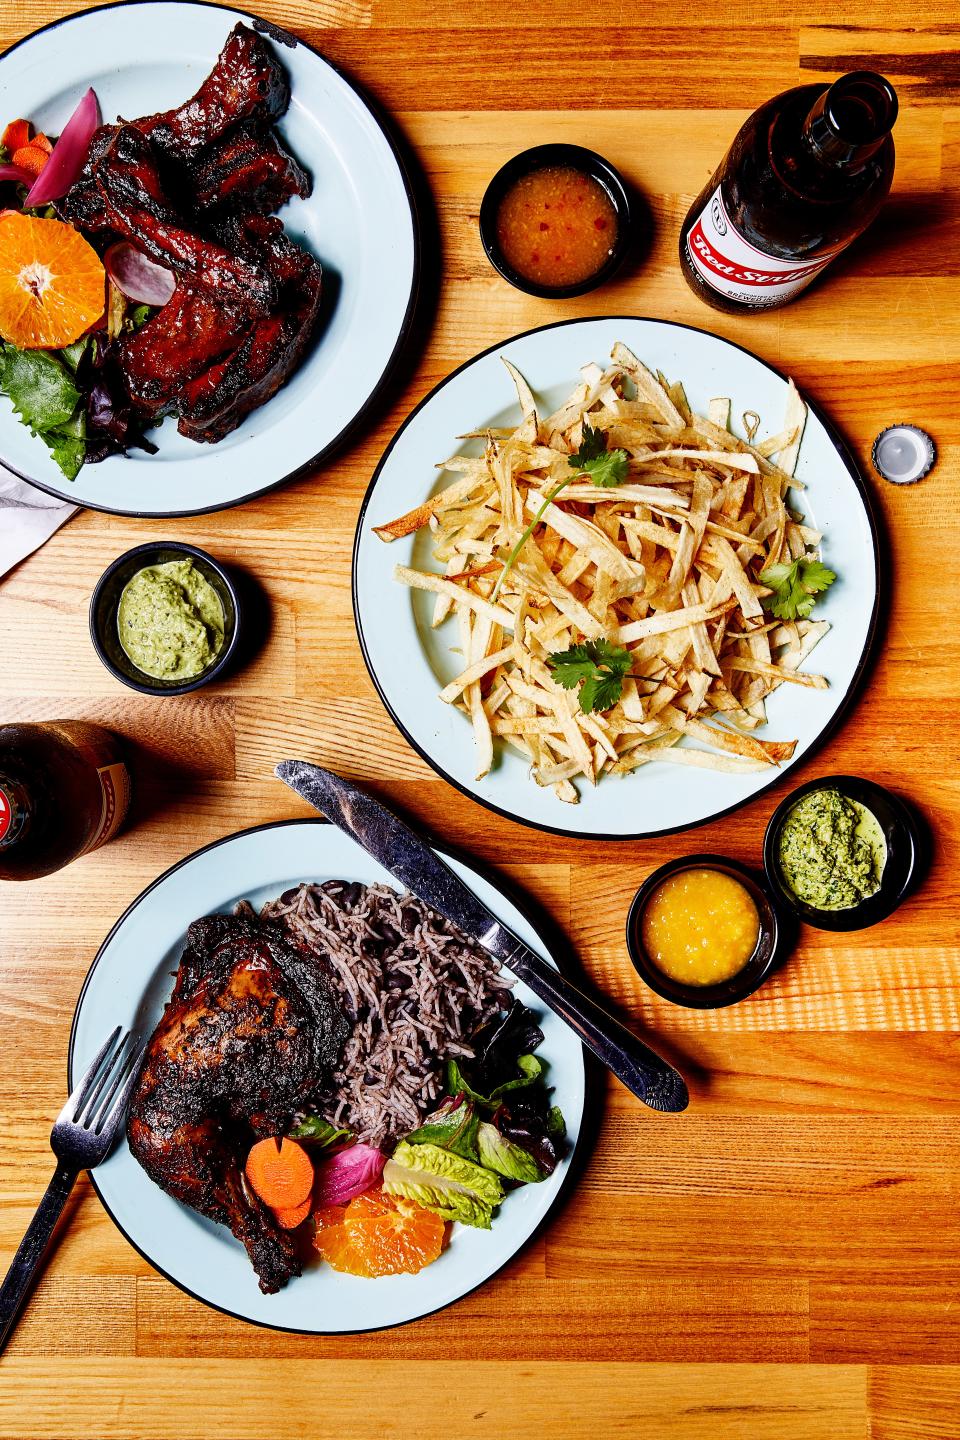 The spreads at Isla Vida draw on foster's love for Afro-Caribbean cooking and feature sticky-sweet barbecue ribs and juicy, crispy-skinned chicken quarters.